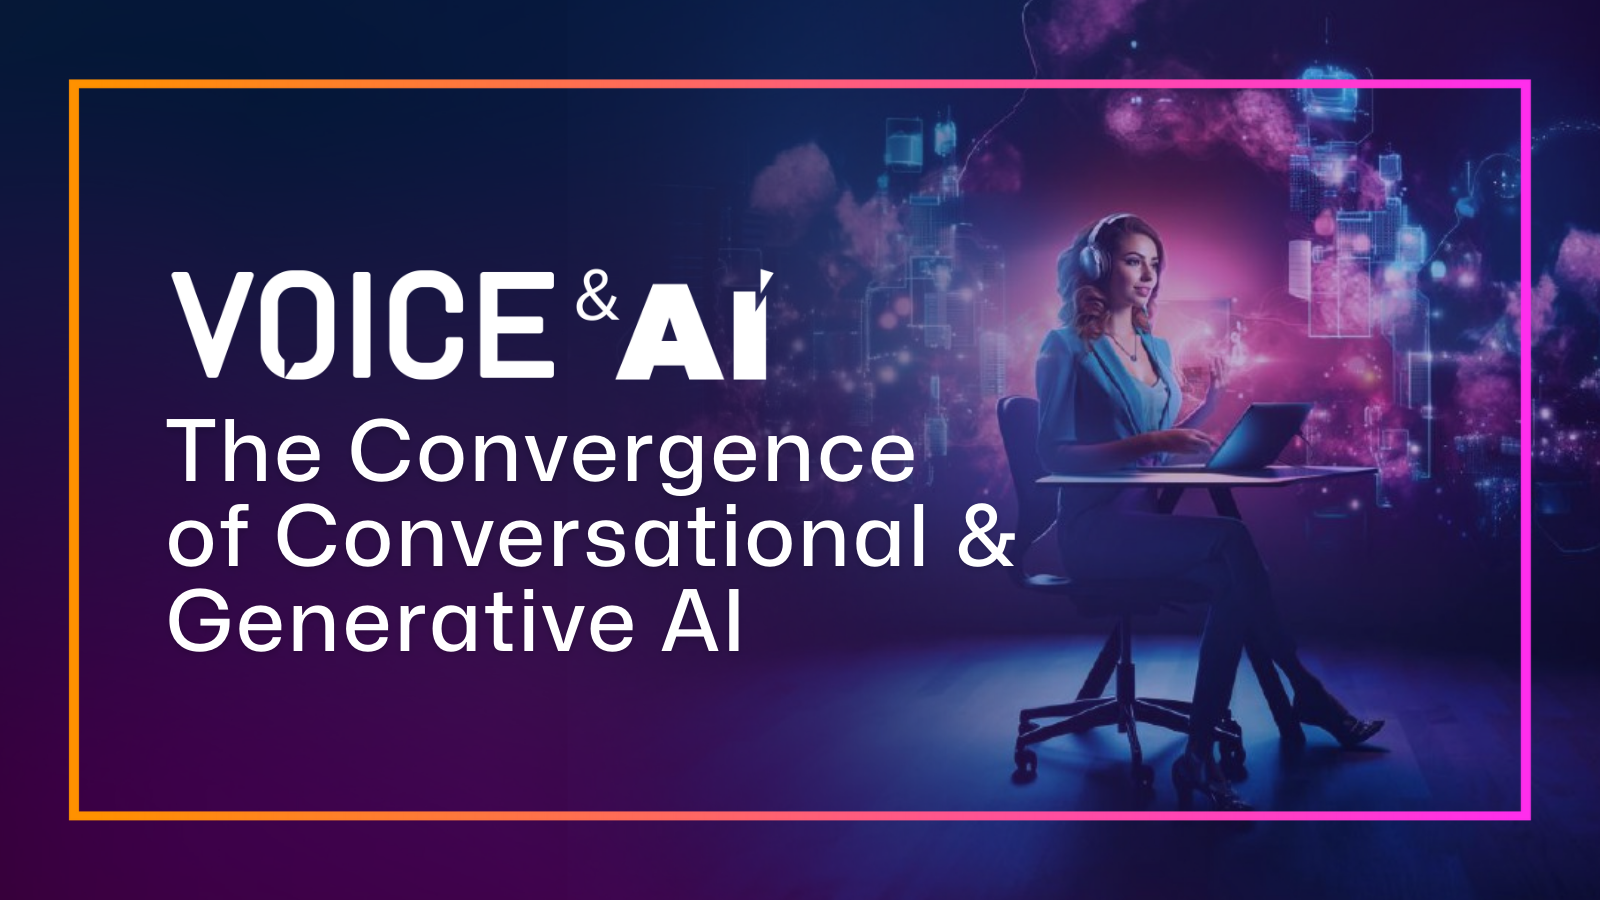 The Convergence of Conversational & Generative AI